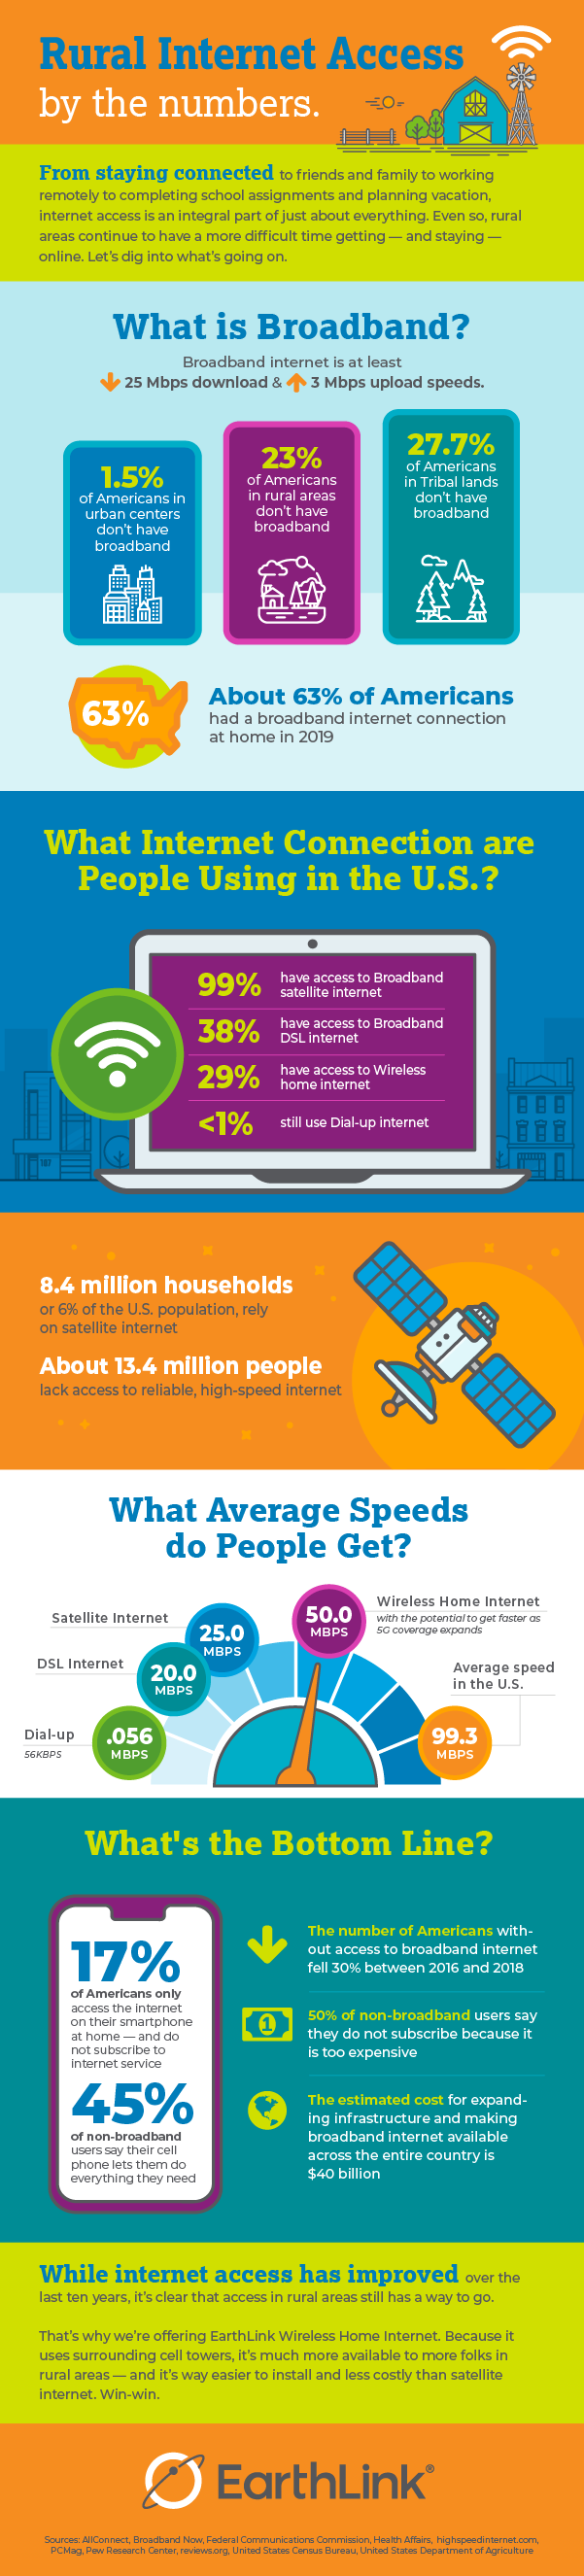 Infographic with information about Rural Internet Access